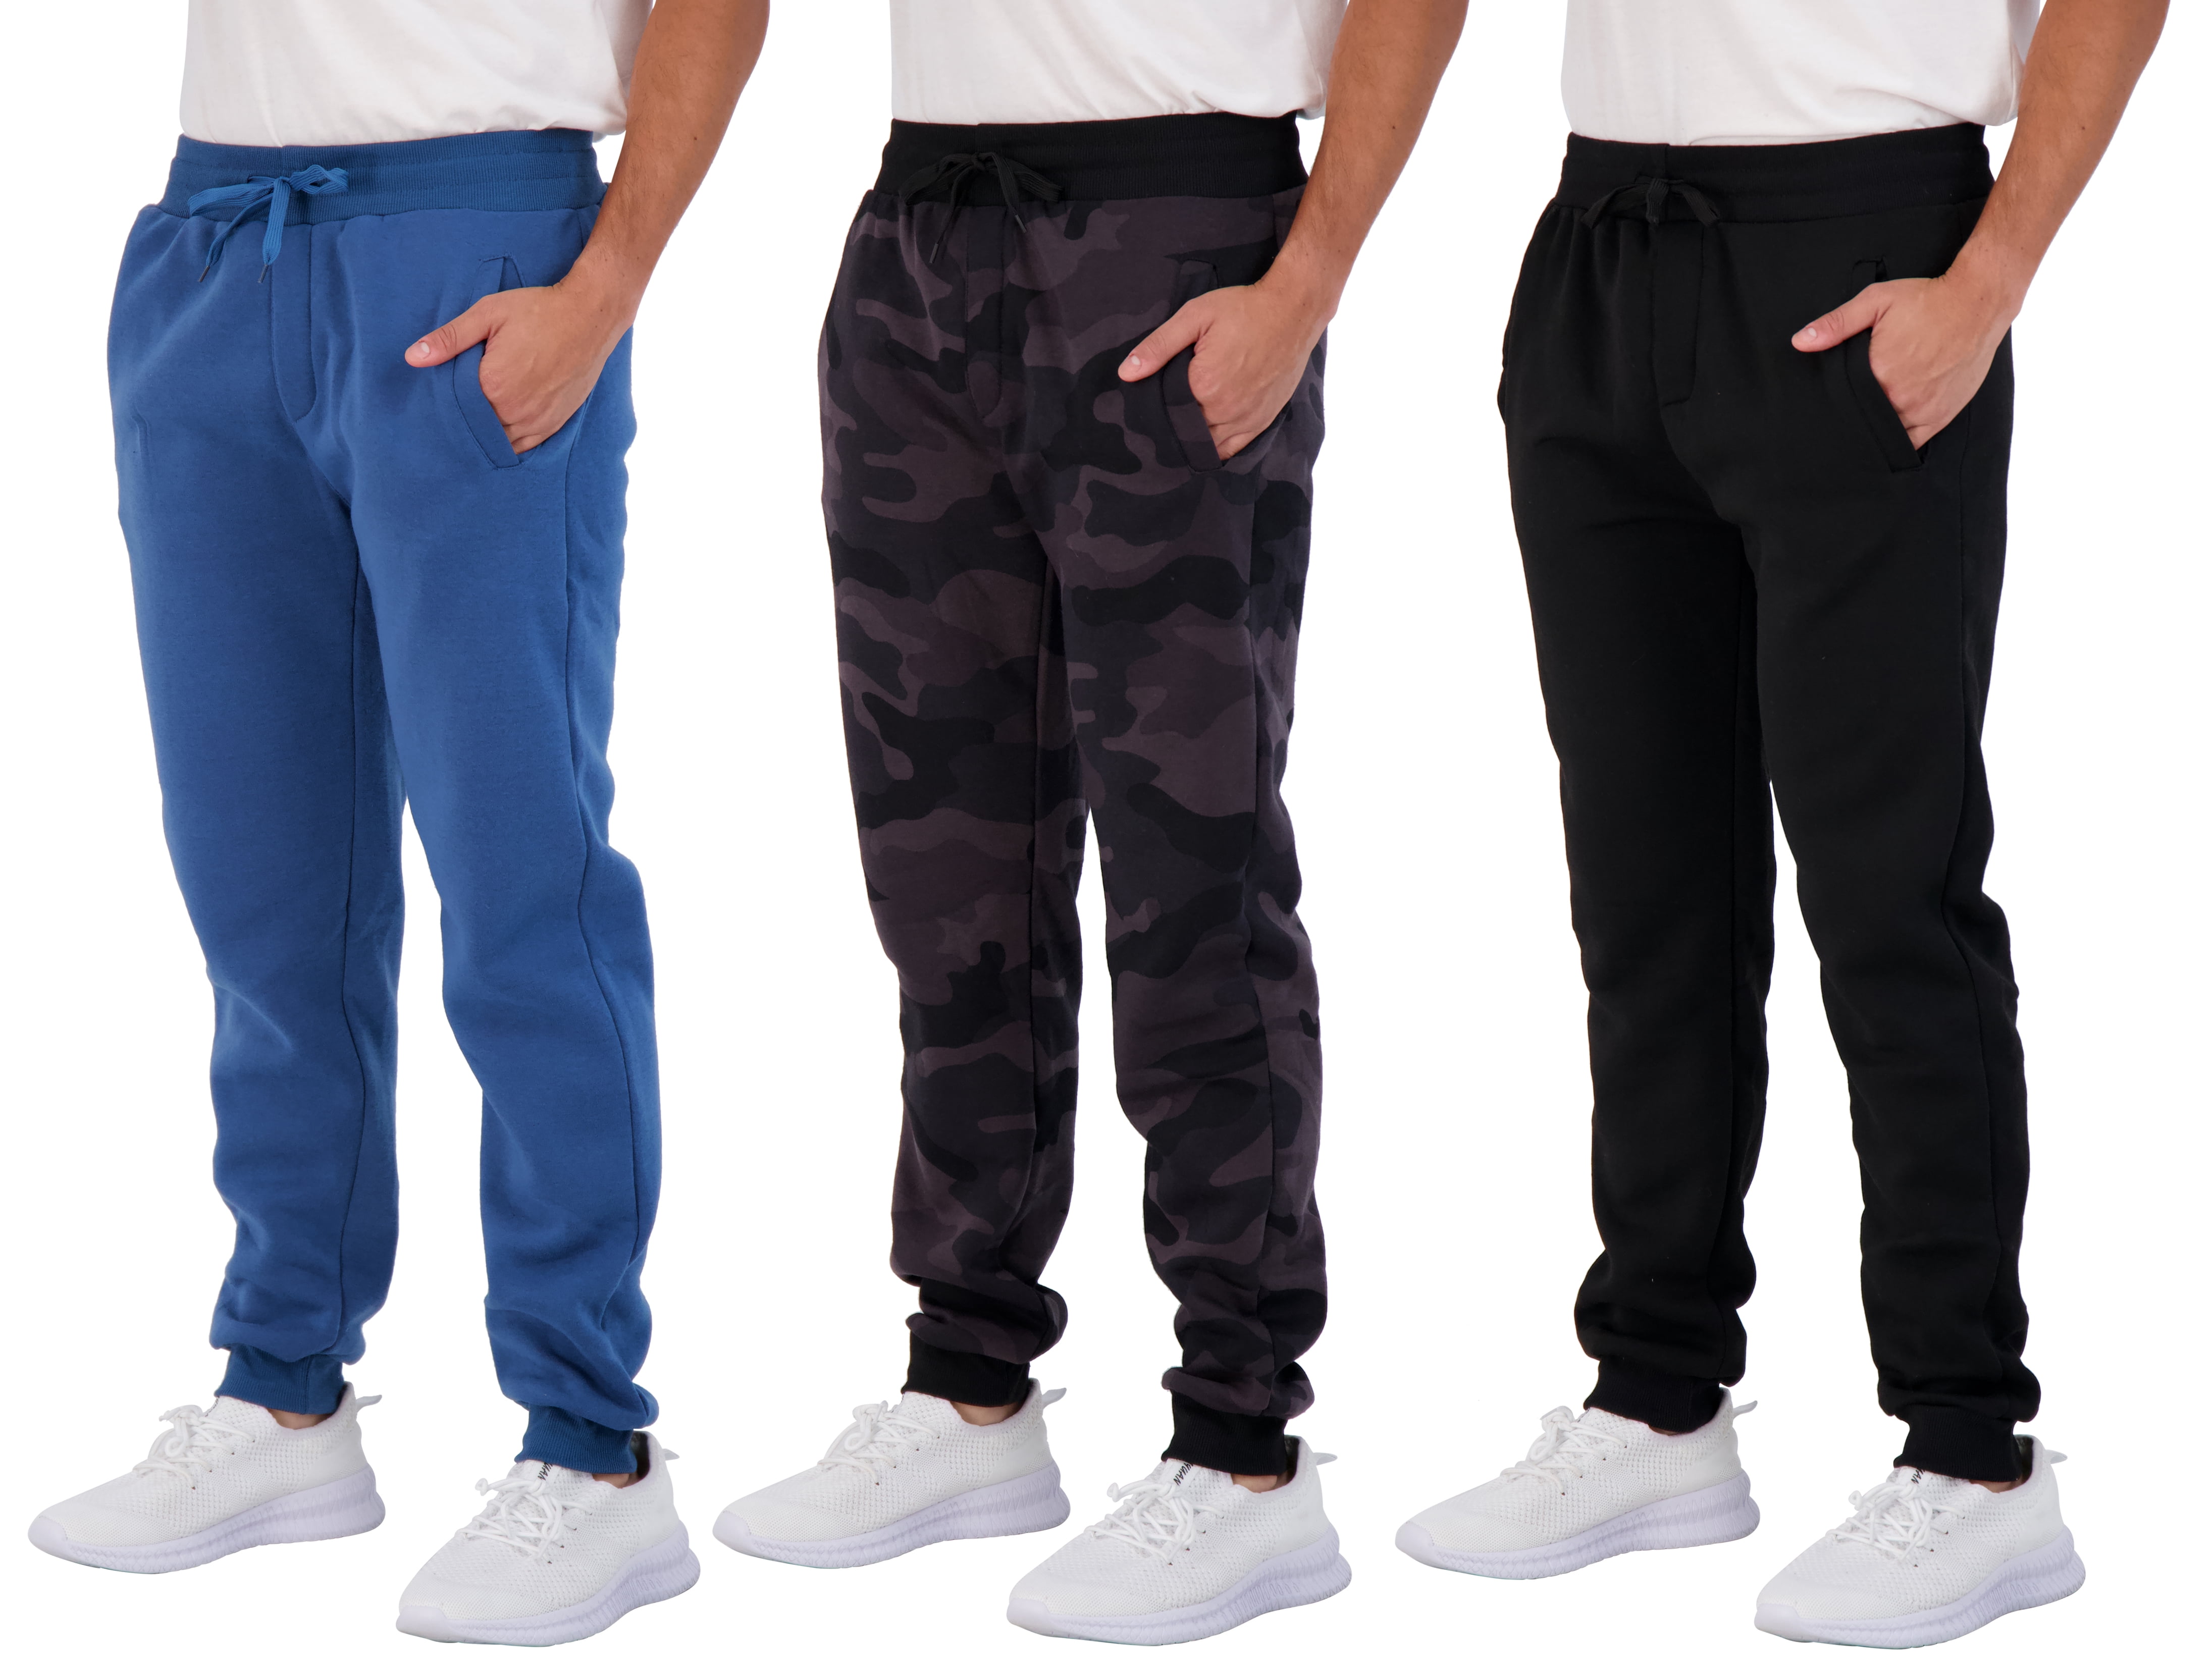 3 Pack: Boys Youth Active Athletic Soft Fleece Jogger Sweatpants ...